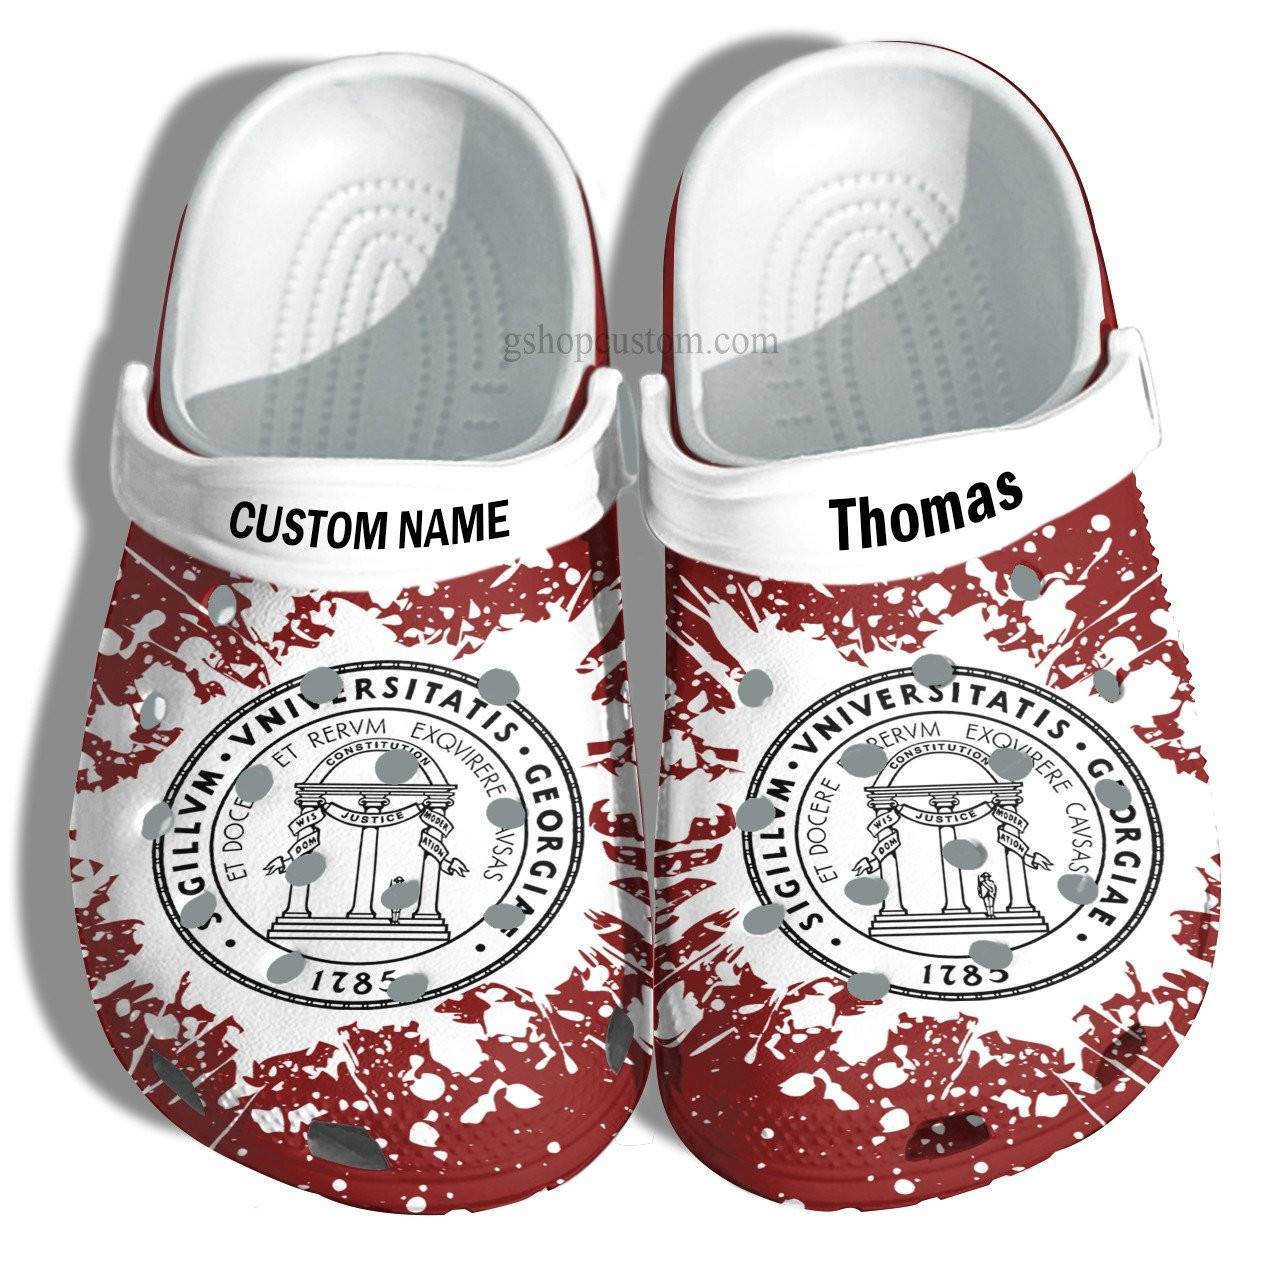 University Of Georgia Graduation Gifts Croc Shoes Customize – Admission Gift Crocss Shoes